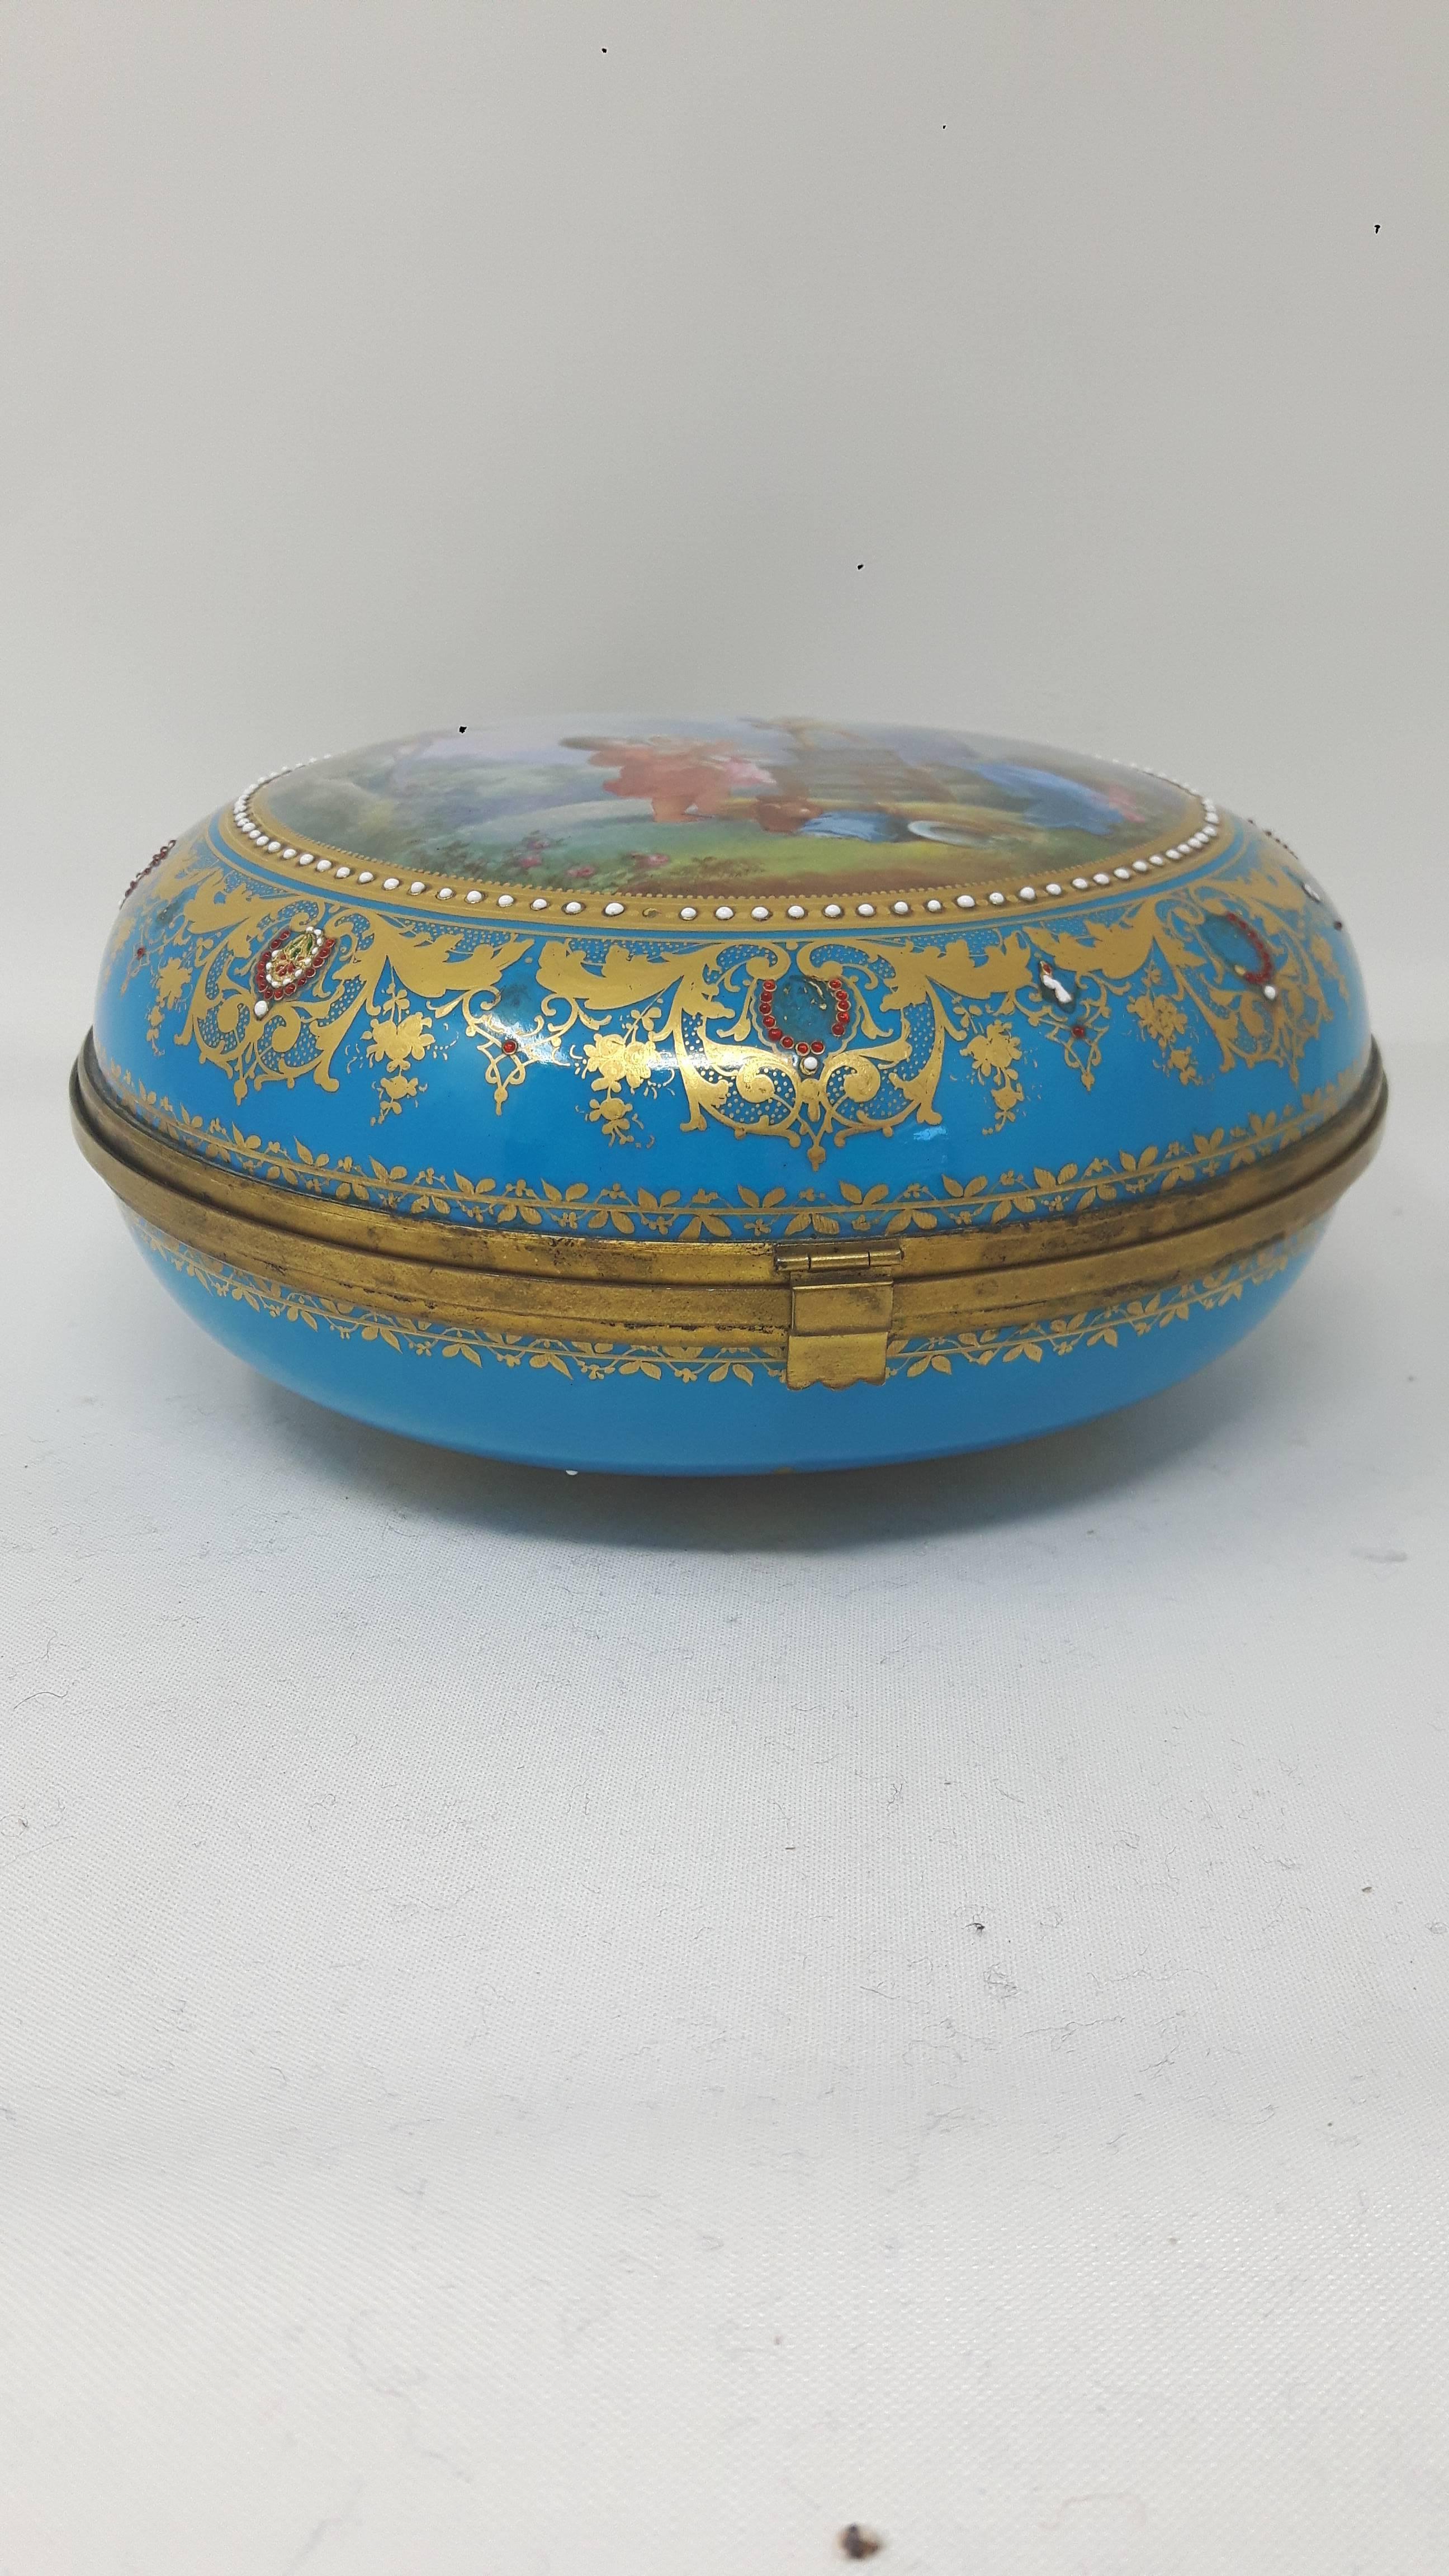 A Sèvres style Paris porcelain round box with ormolu mounts, hand-painted with a romantic scene of two children playing with a bird. The borders are elaborately decorated with gilded friezes and enamelled jewels, as is the bottom of the bo.